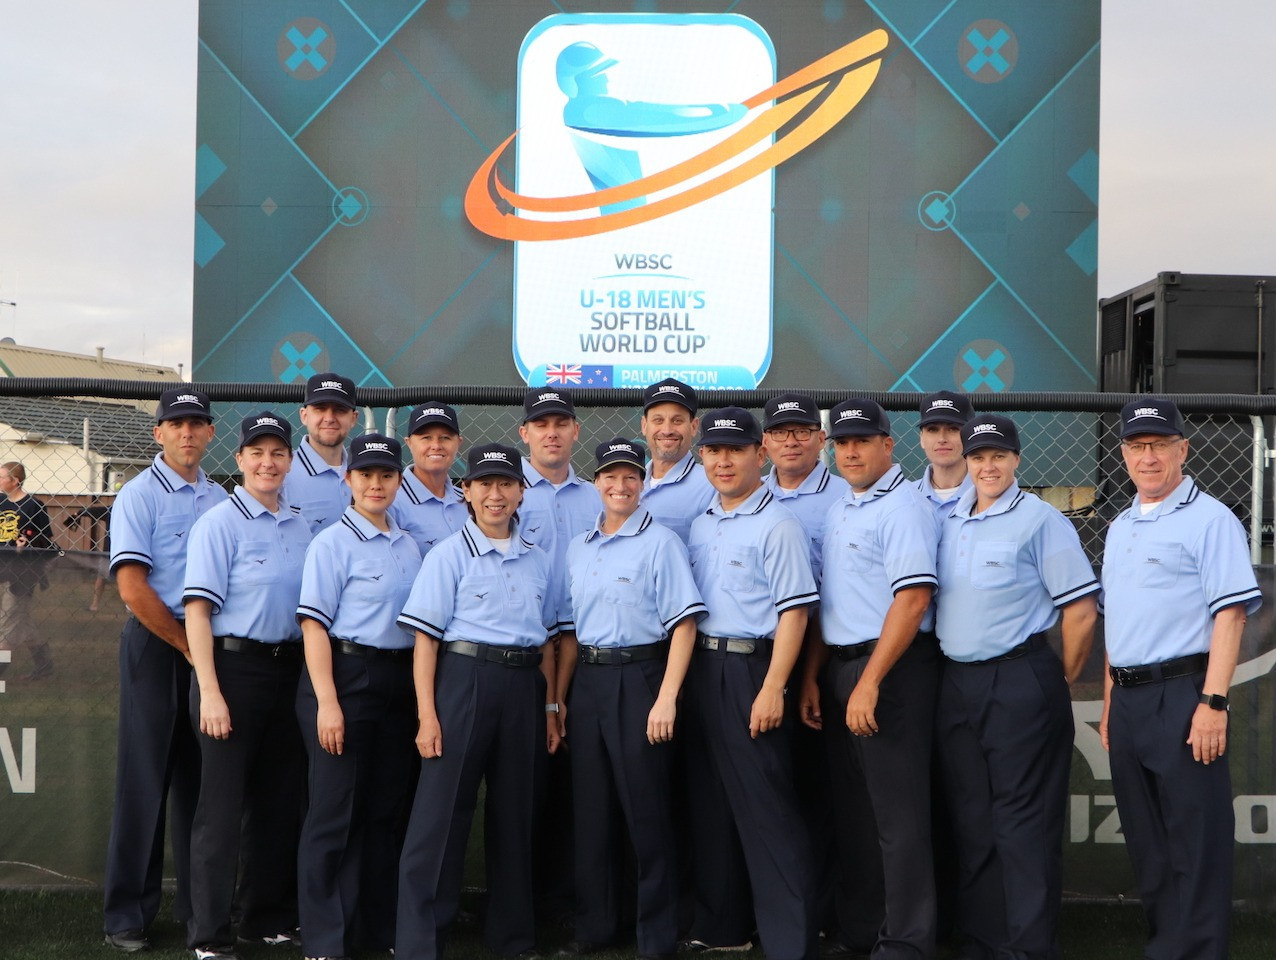 Softball is returning to the Olympic stage for the first time since Beijing 2008 ©WBSC